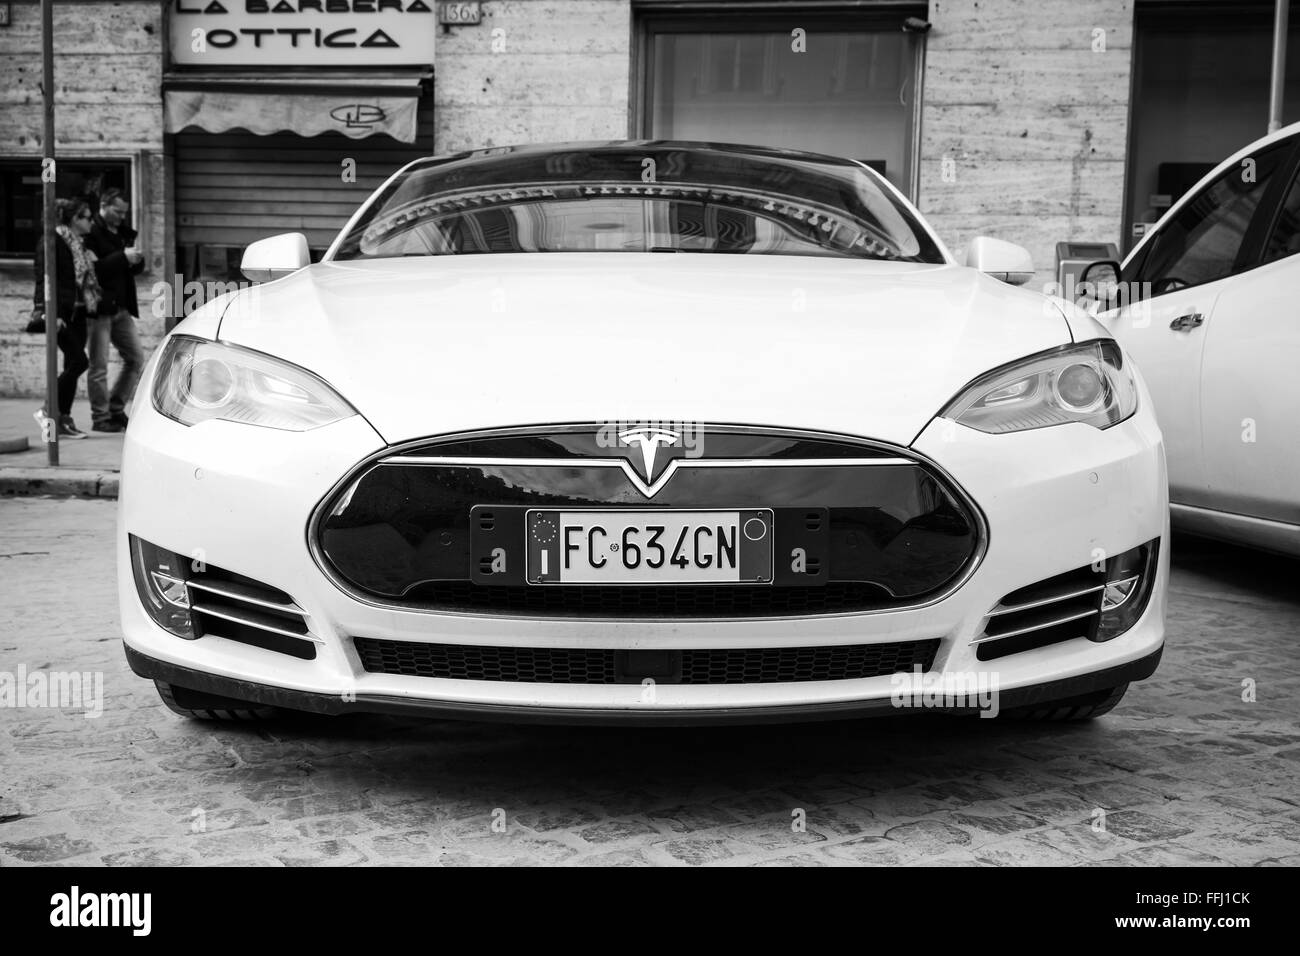 Rome, Italy - February 13, 2016 : White Tesla model S car parked on urban roadside in Rome, front view, closeup black and white Stock Photo